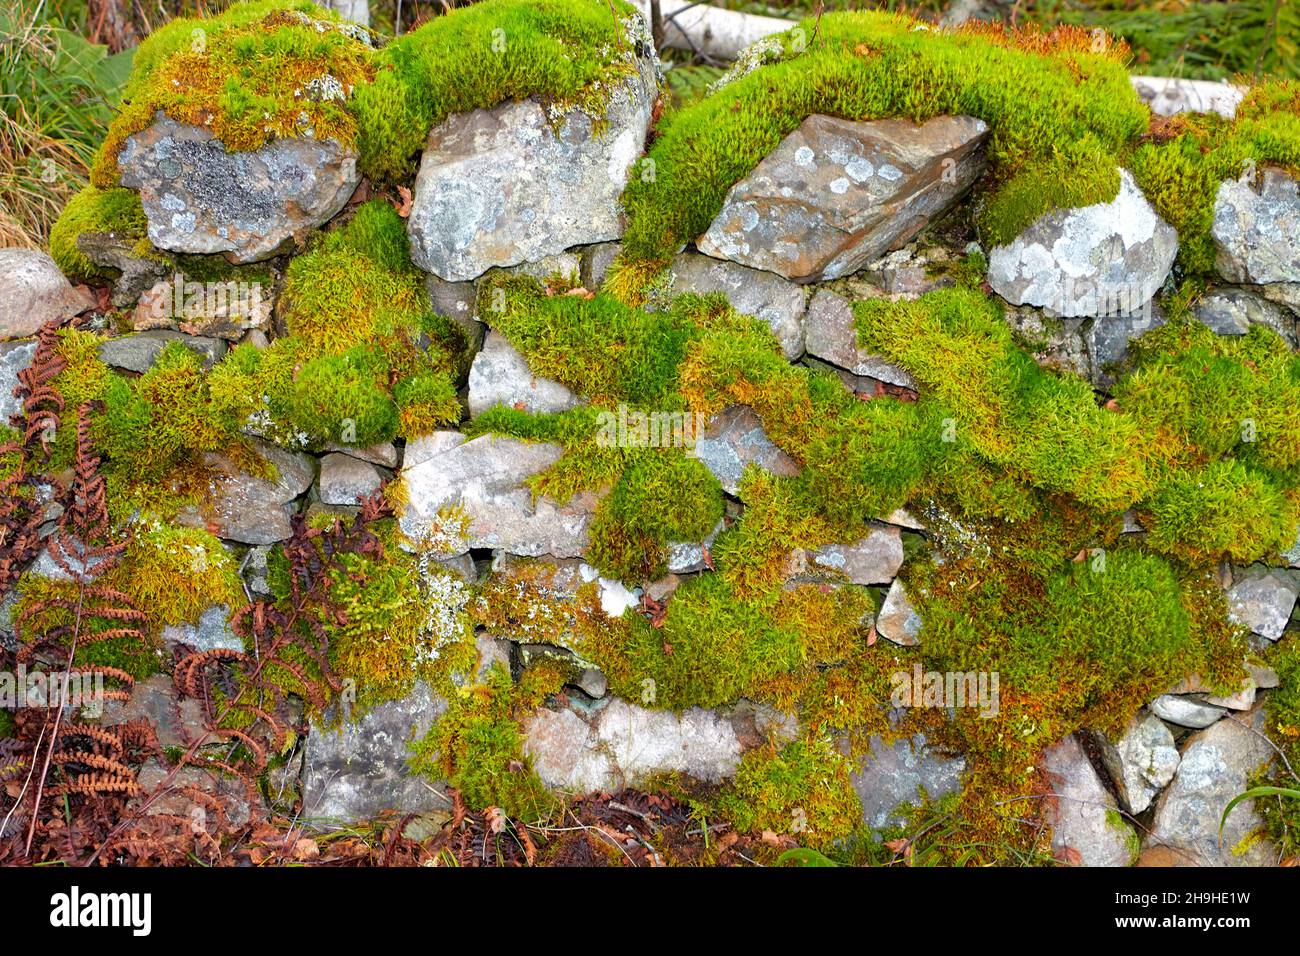 PROLIFIC GROWTH OF MOSS Bryophyta GROWING ON LICHEN COVERED STONES IN A WALL Stock Photo